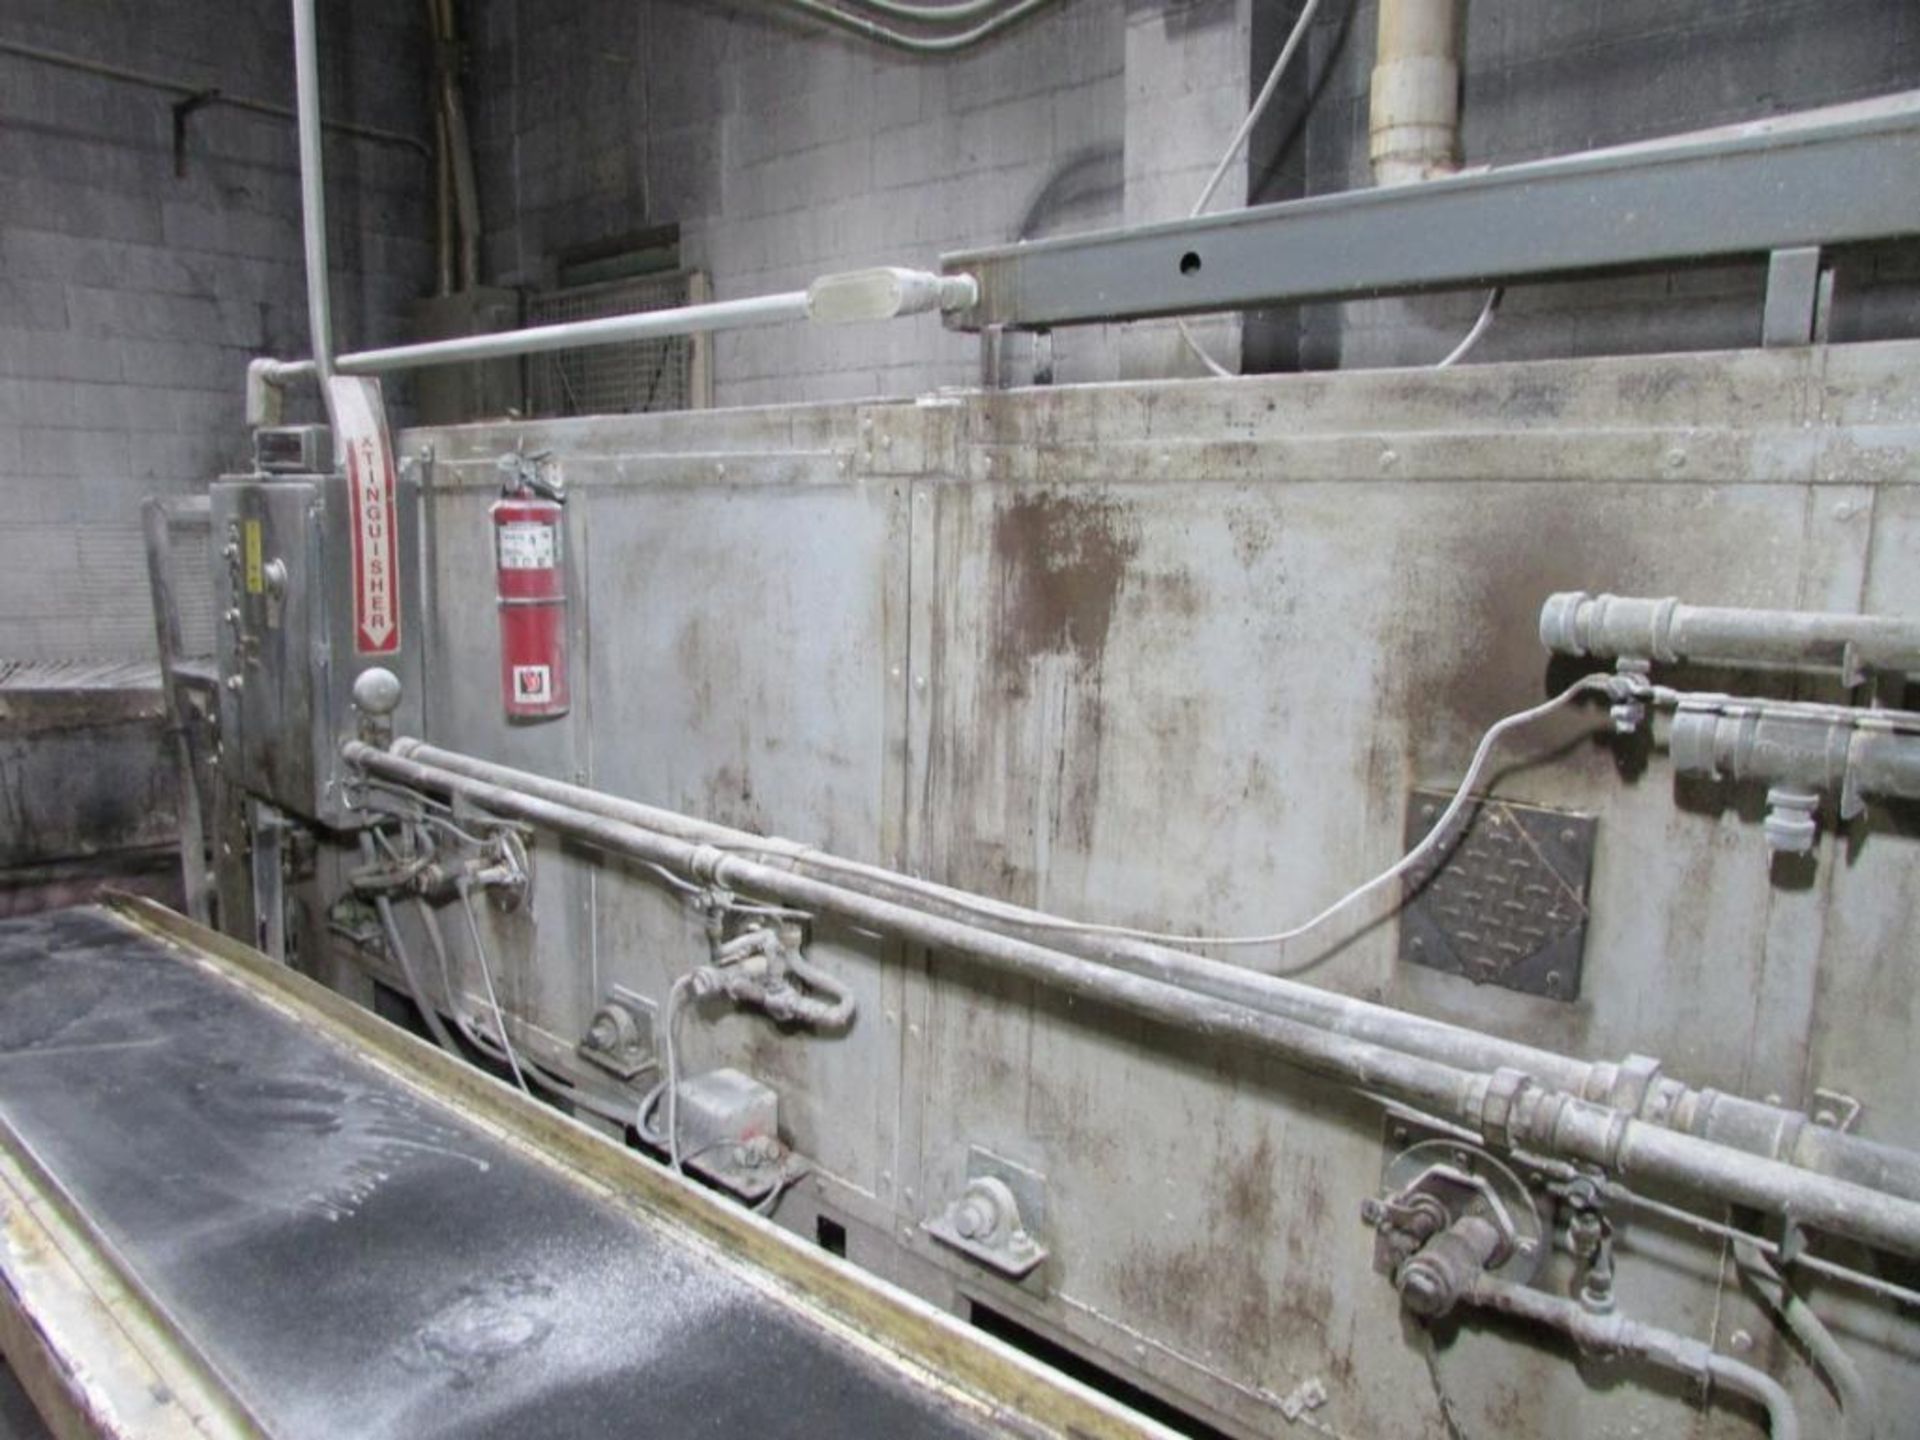 Universal 50'x3' Natural Gas Conveyor Tunnel Oven - Image 8 of 17